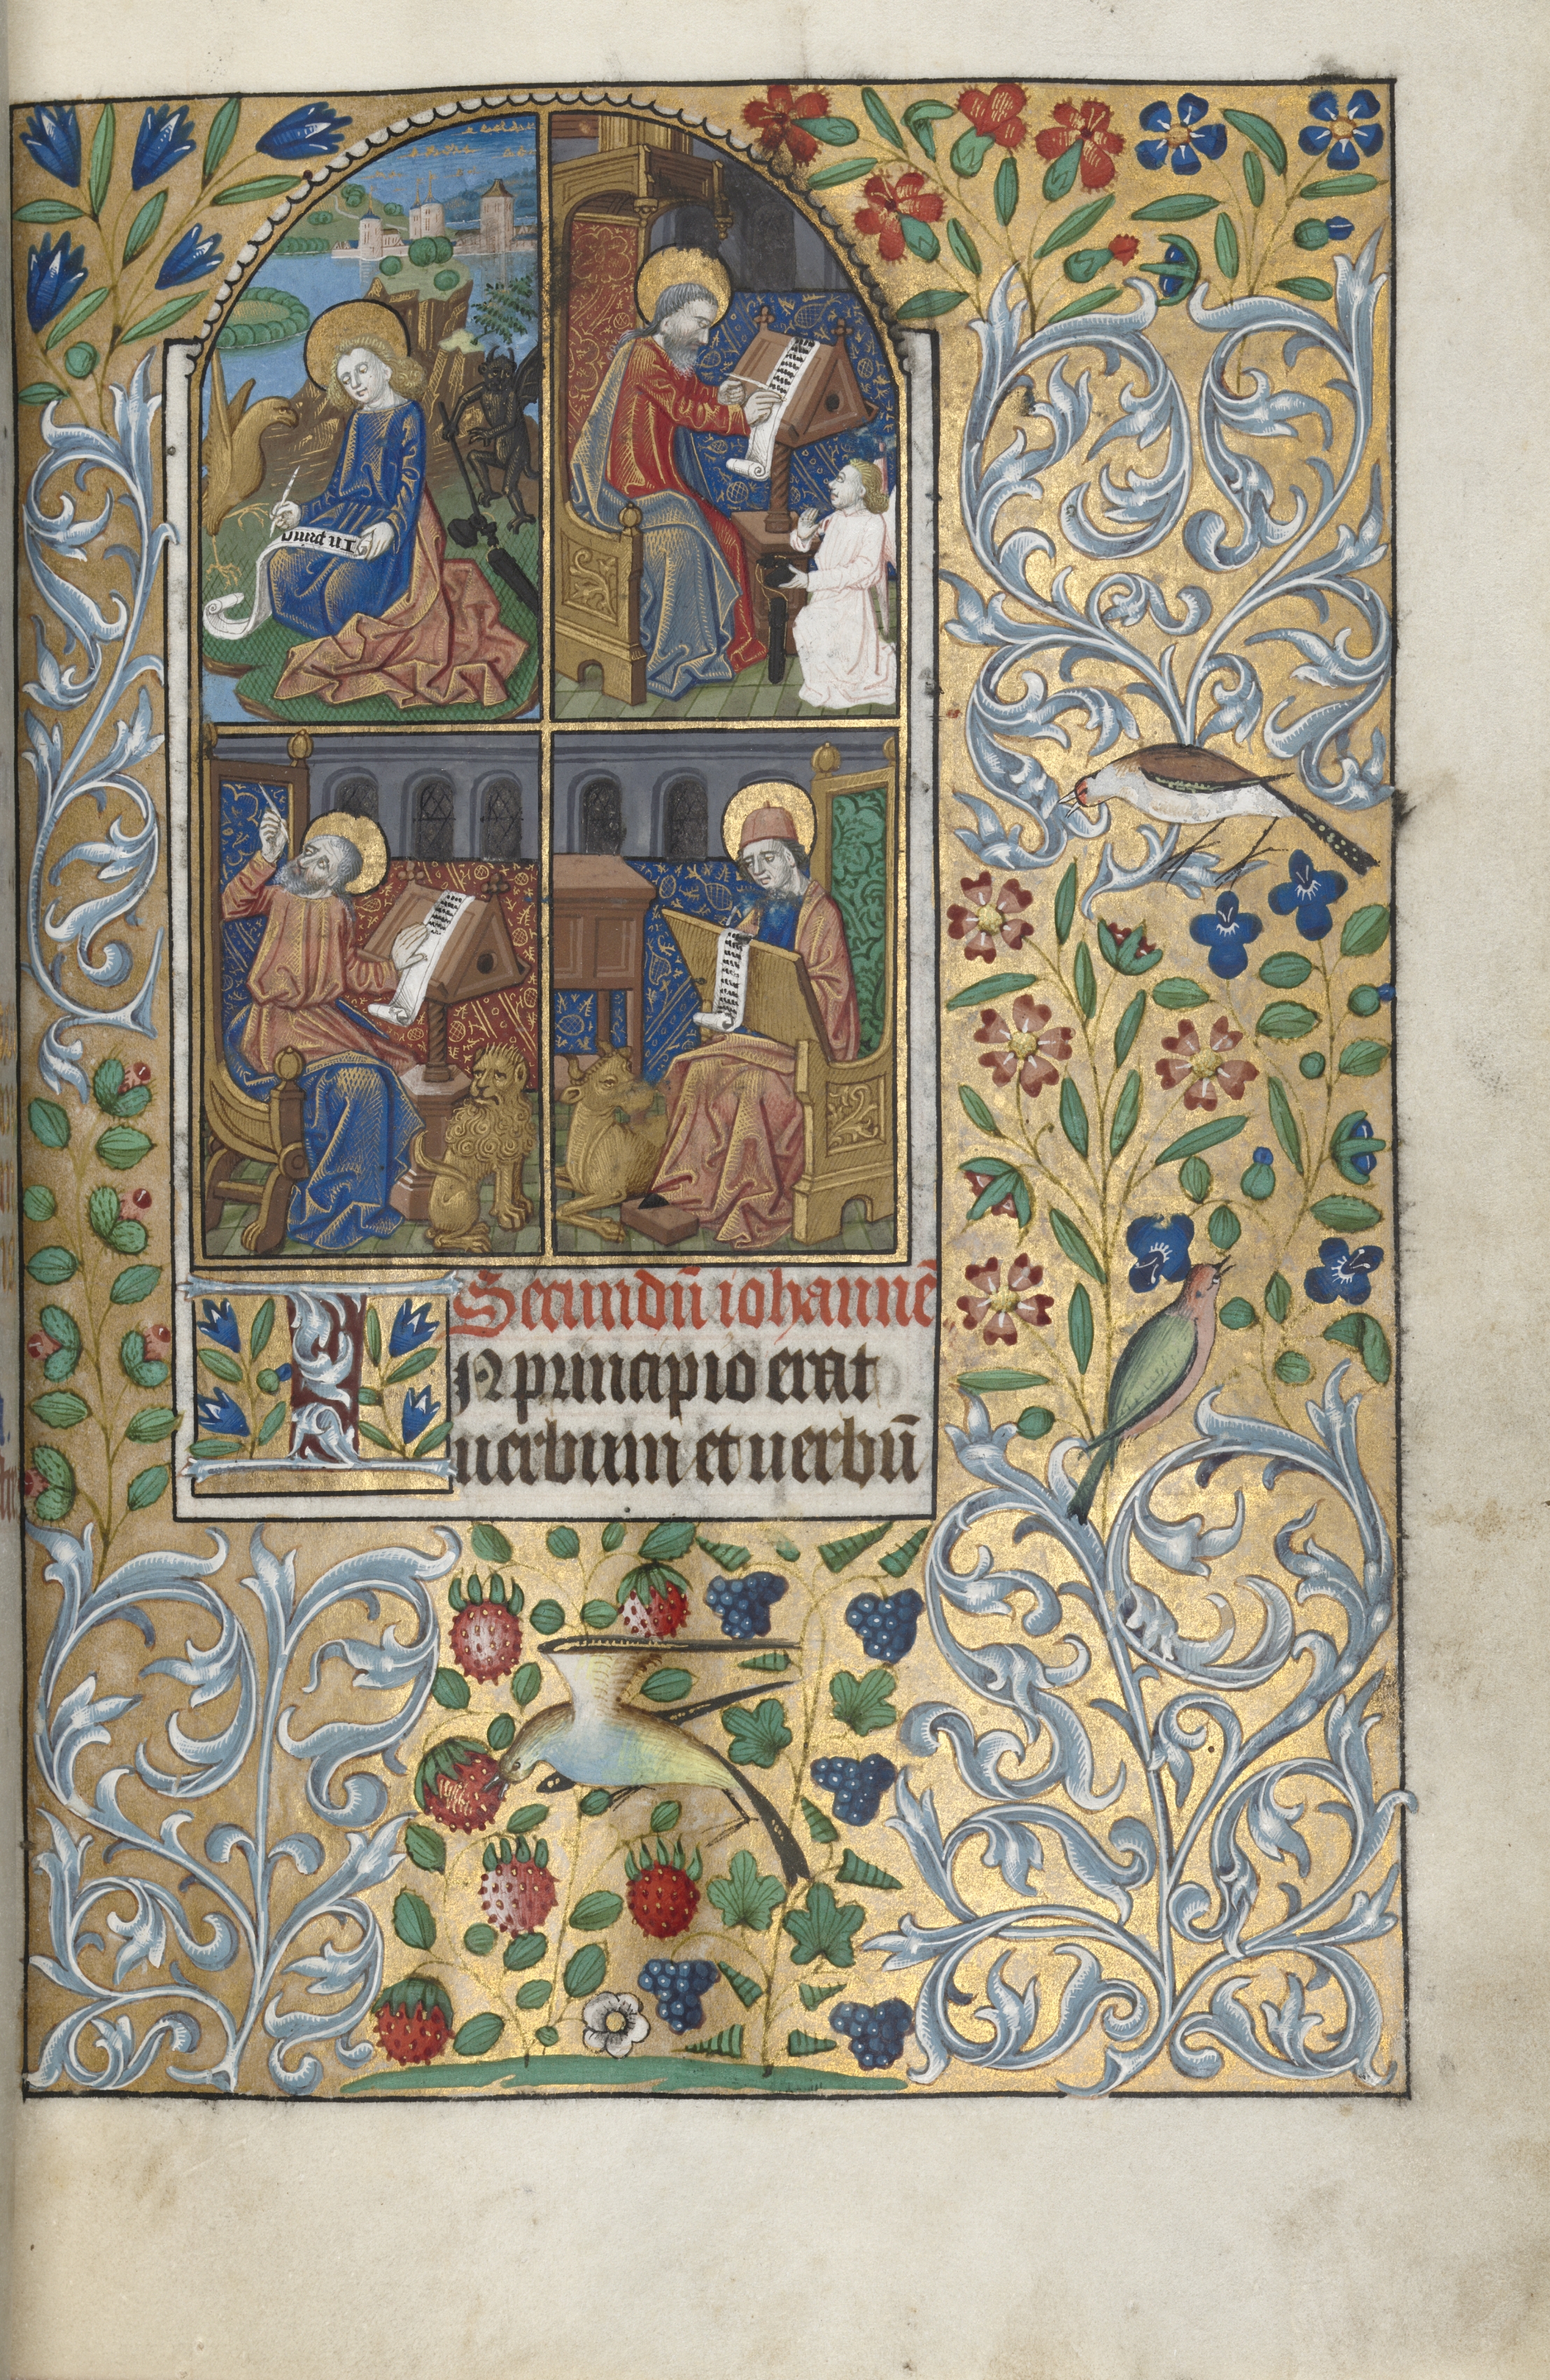 Book of Hours (Use of Rouen): fol. 13r, The Four Evangelists